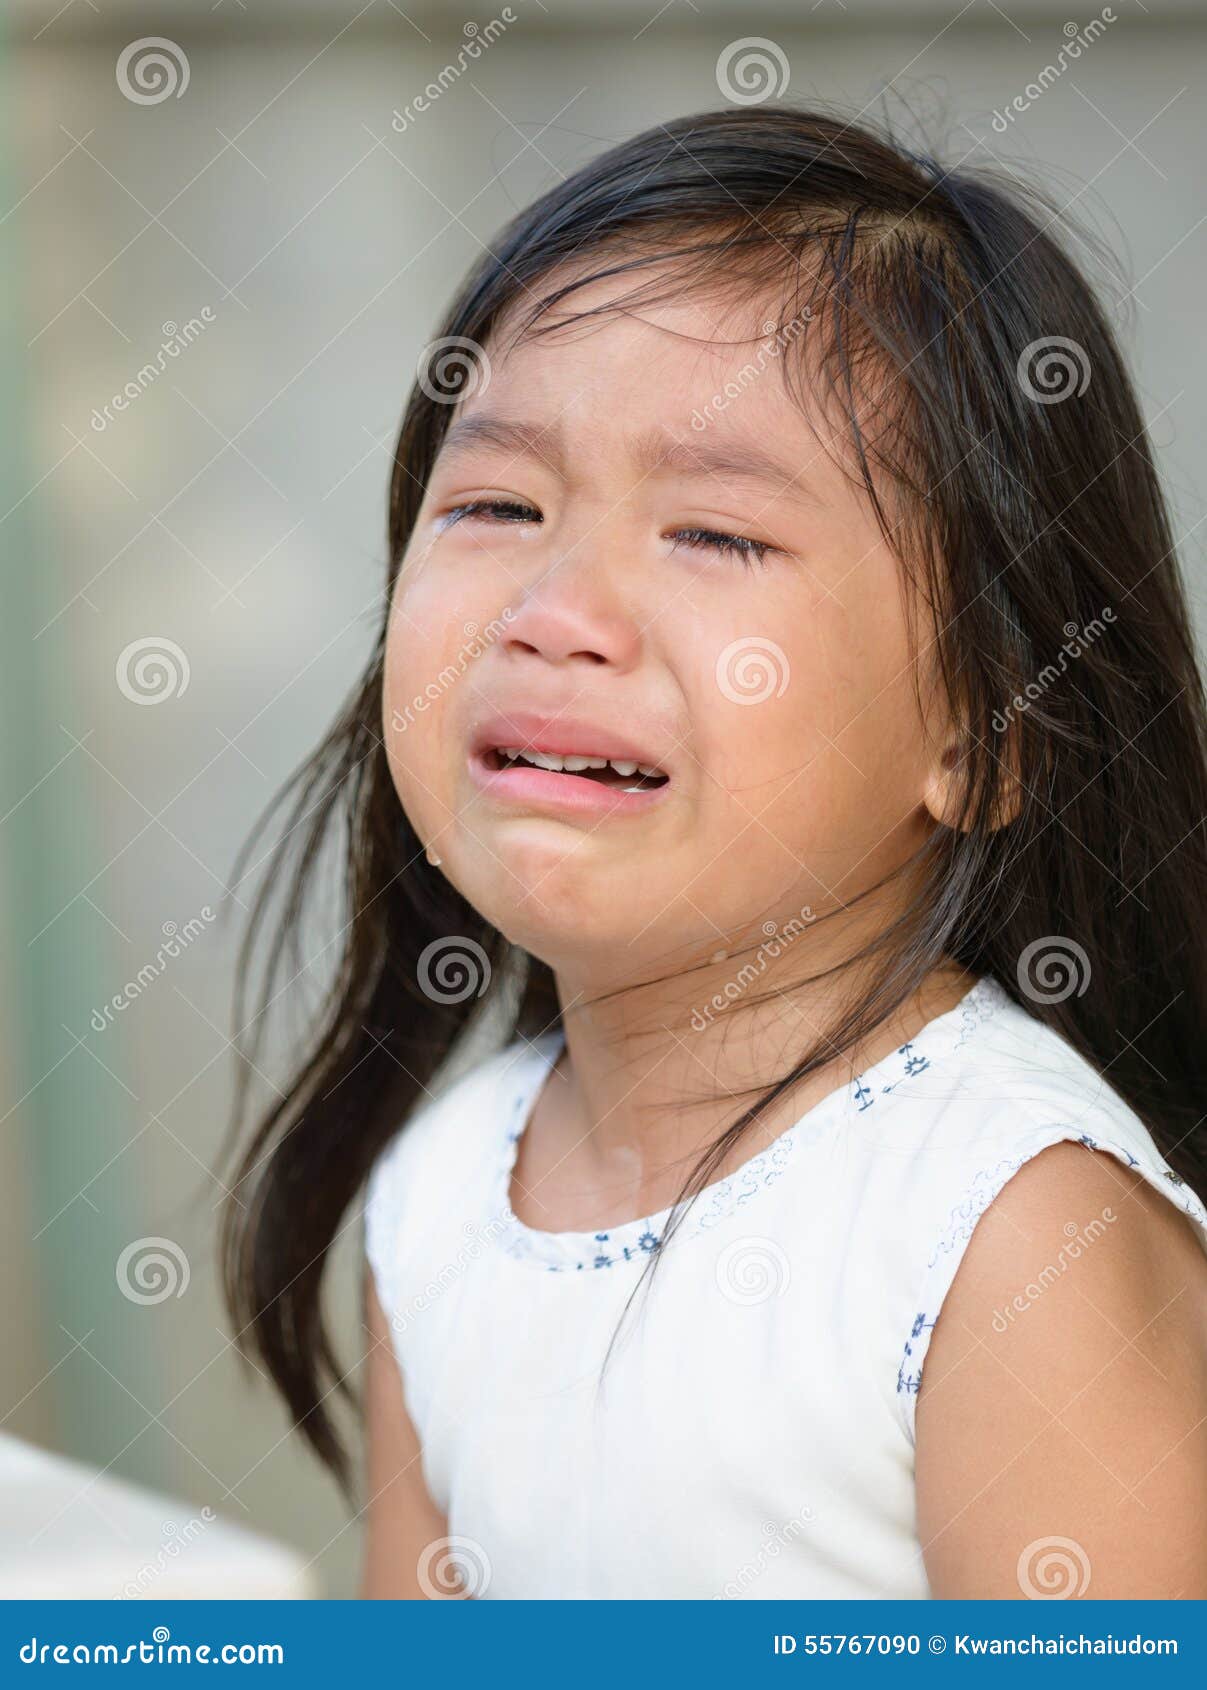 Cute Little Asian Girl Crying Stock Photo Image 55767